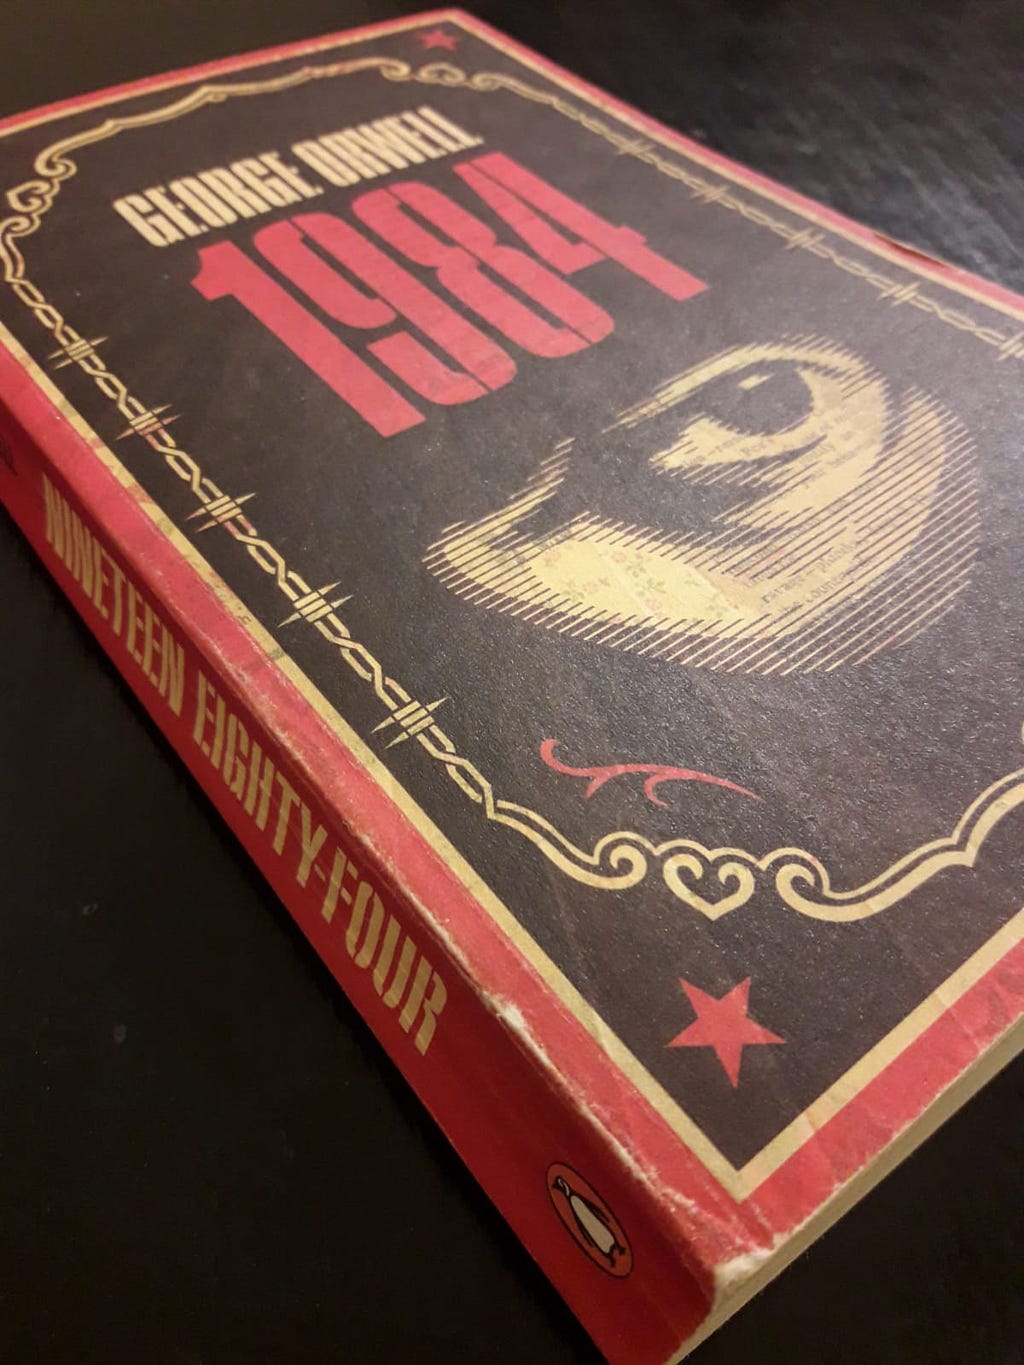 A picture of the book 1984 by George Orwell taken by the author of this article.